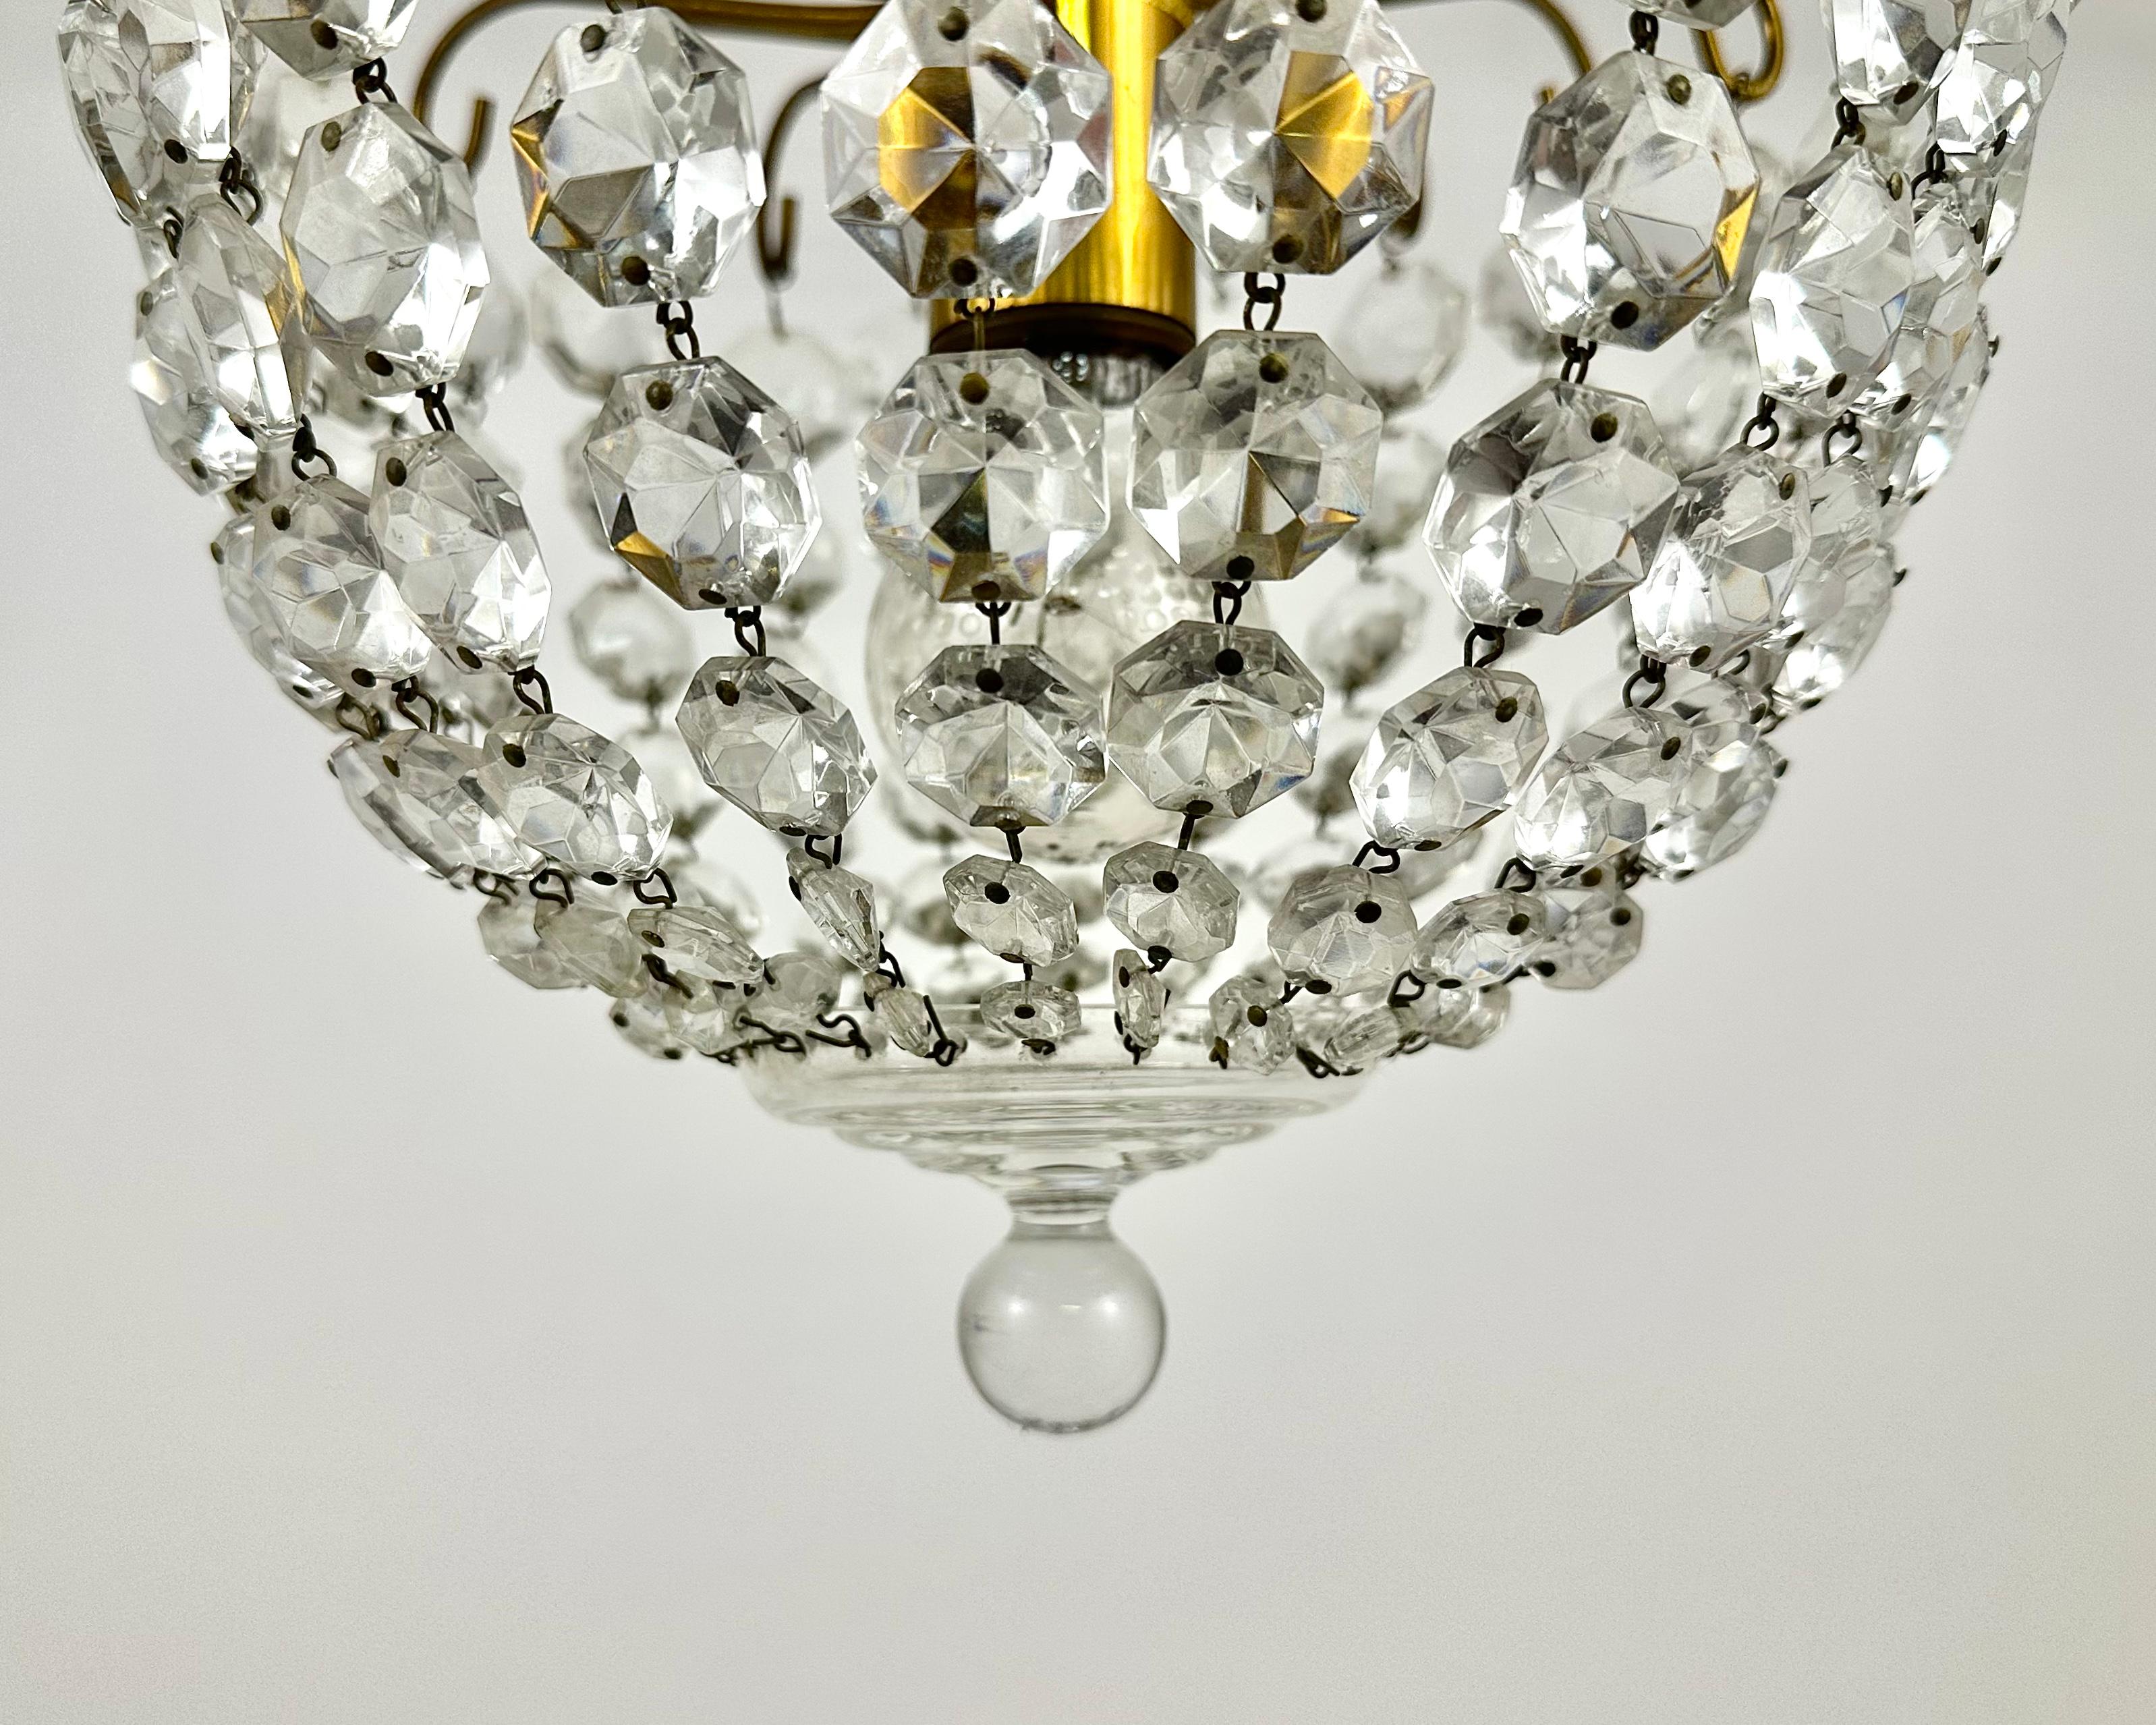 Vintage Crystal and Brass Chandelier for 1 light point.

Manufactured in France.

We present you a stunning ceiling chandelier that will become a real decoration of your interior.

This beautiful chandelier has a classic style and is made of high